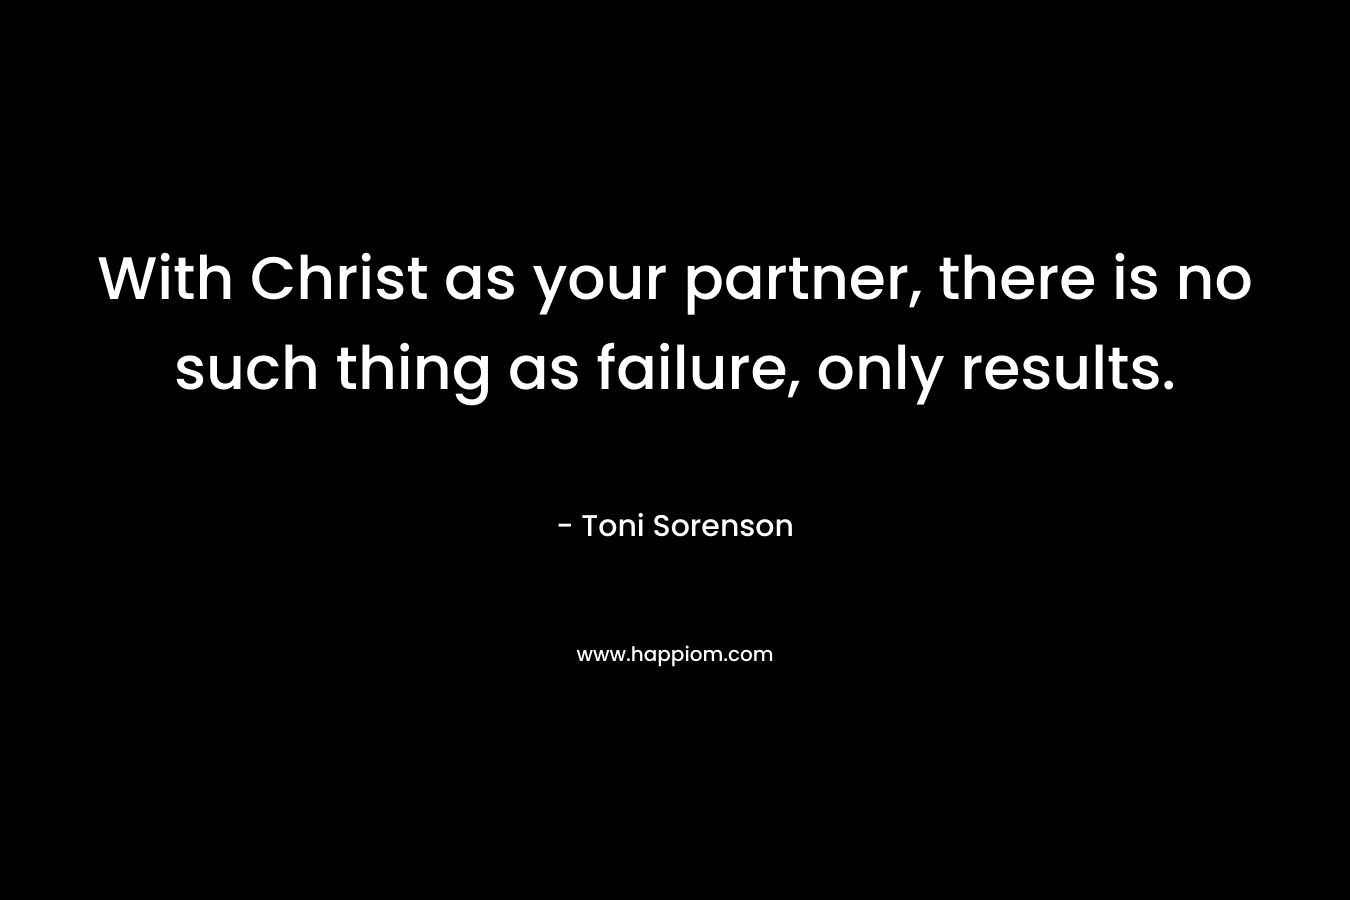 With Christ as your partner, there is no such thing as failure, only results.